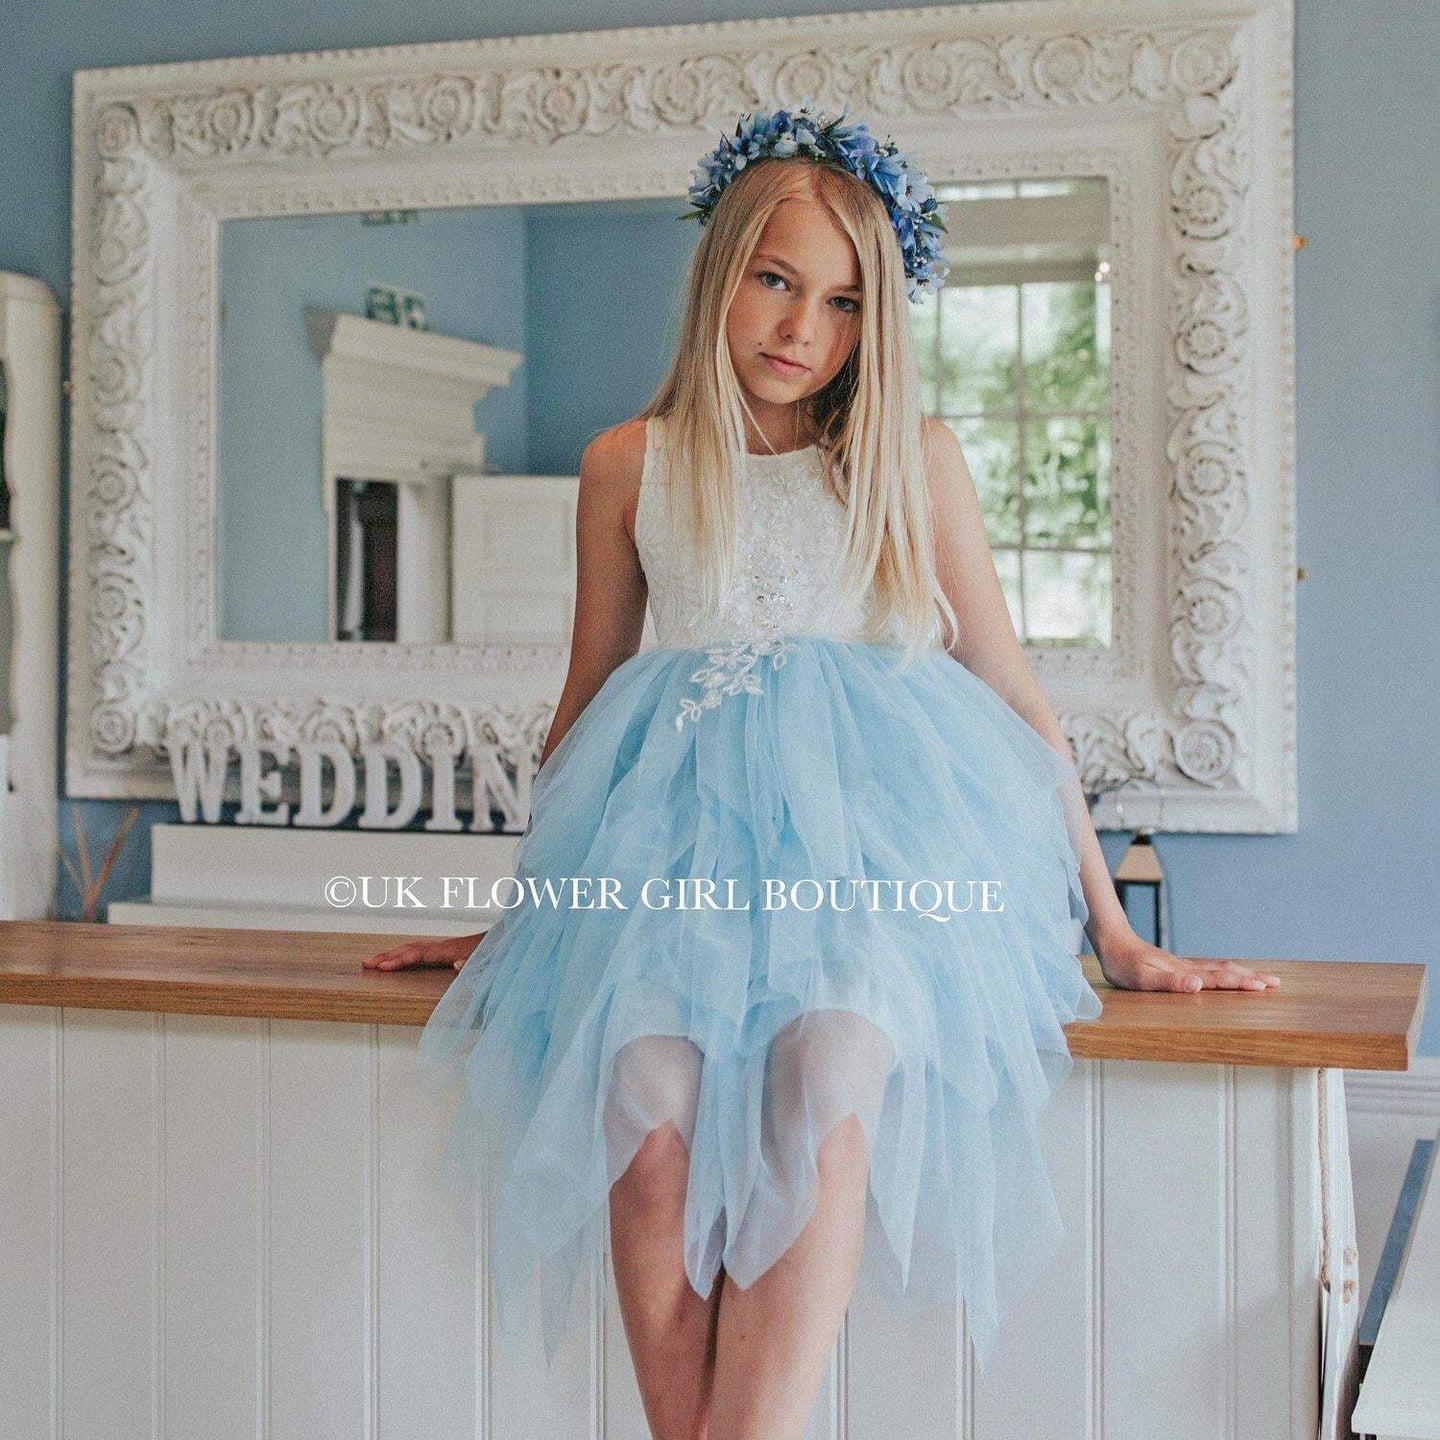 Girl in a white an blue party dress sitting in front of a mirror